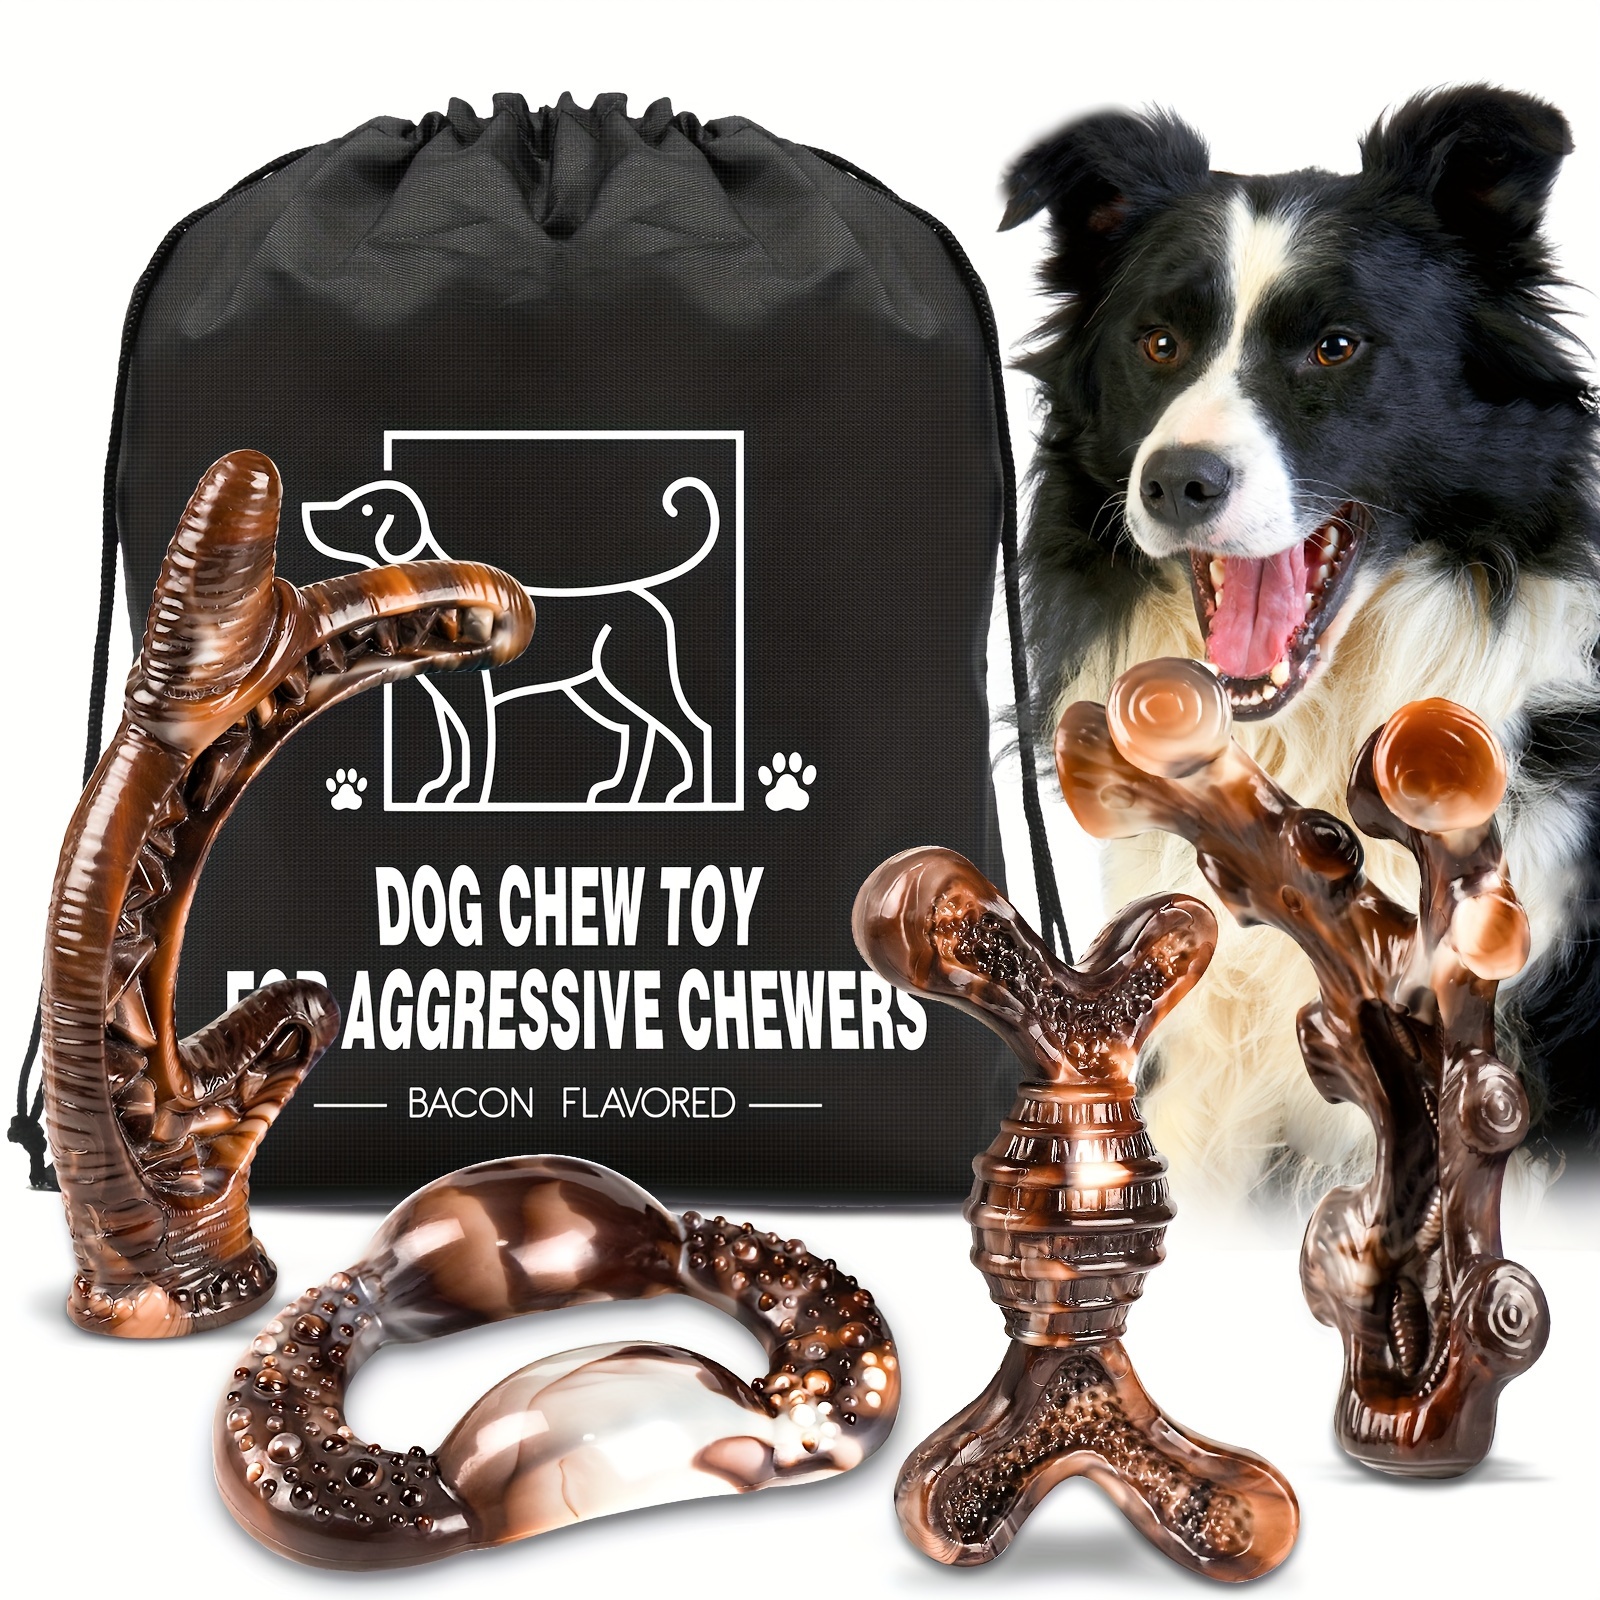 Dog Toys for Aggressive Chewers Indestructible Large Dogs,Real Bacon  Flavored,Dog Chew Toy Bones Medium/Large Breed Dogs,Best to Keep Them Busy